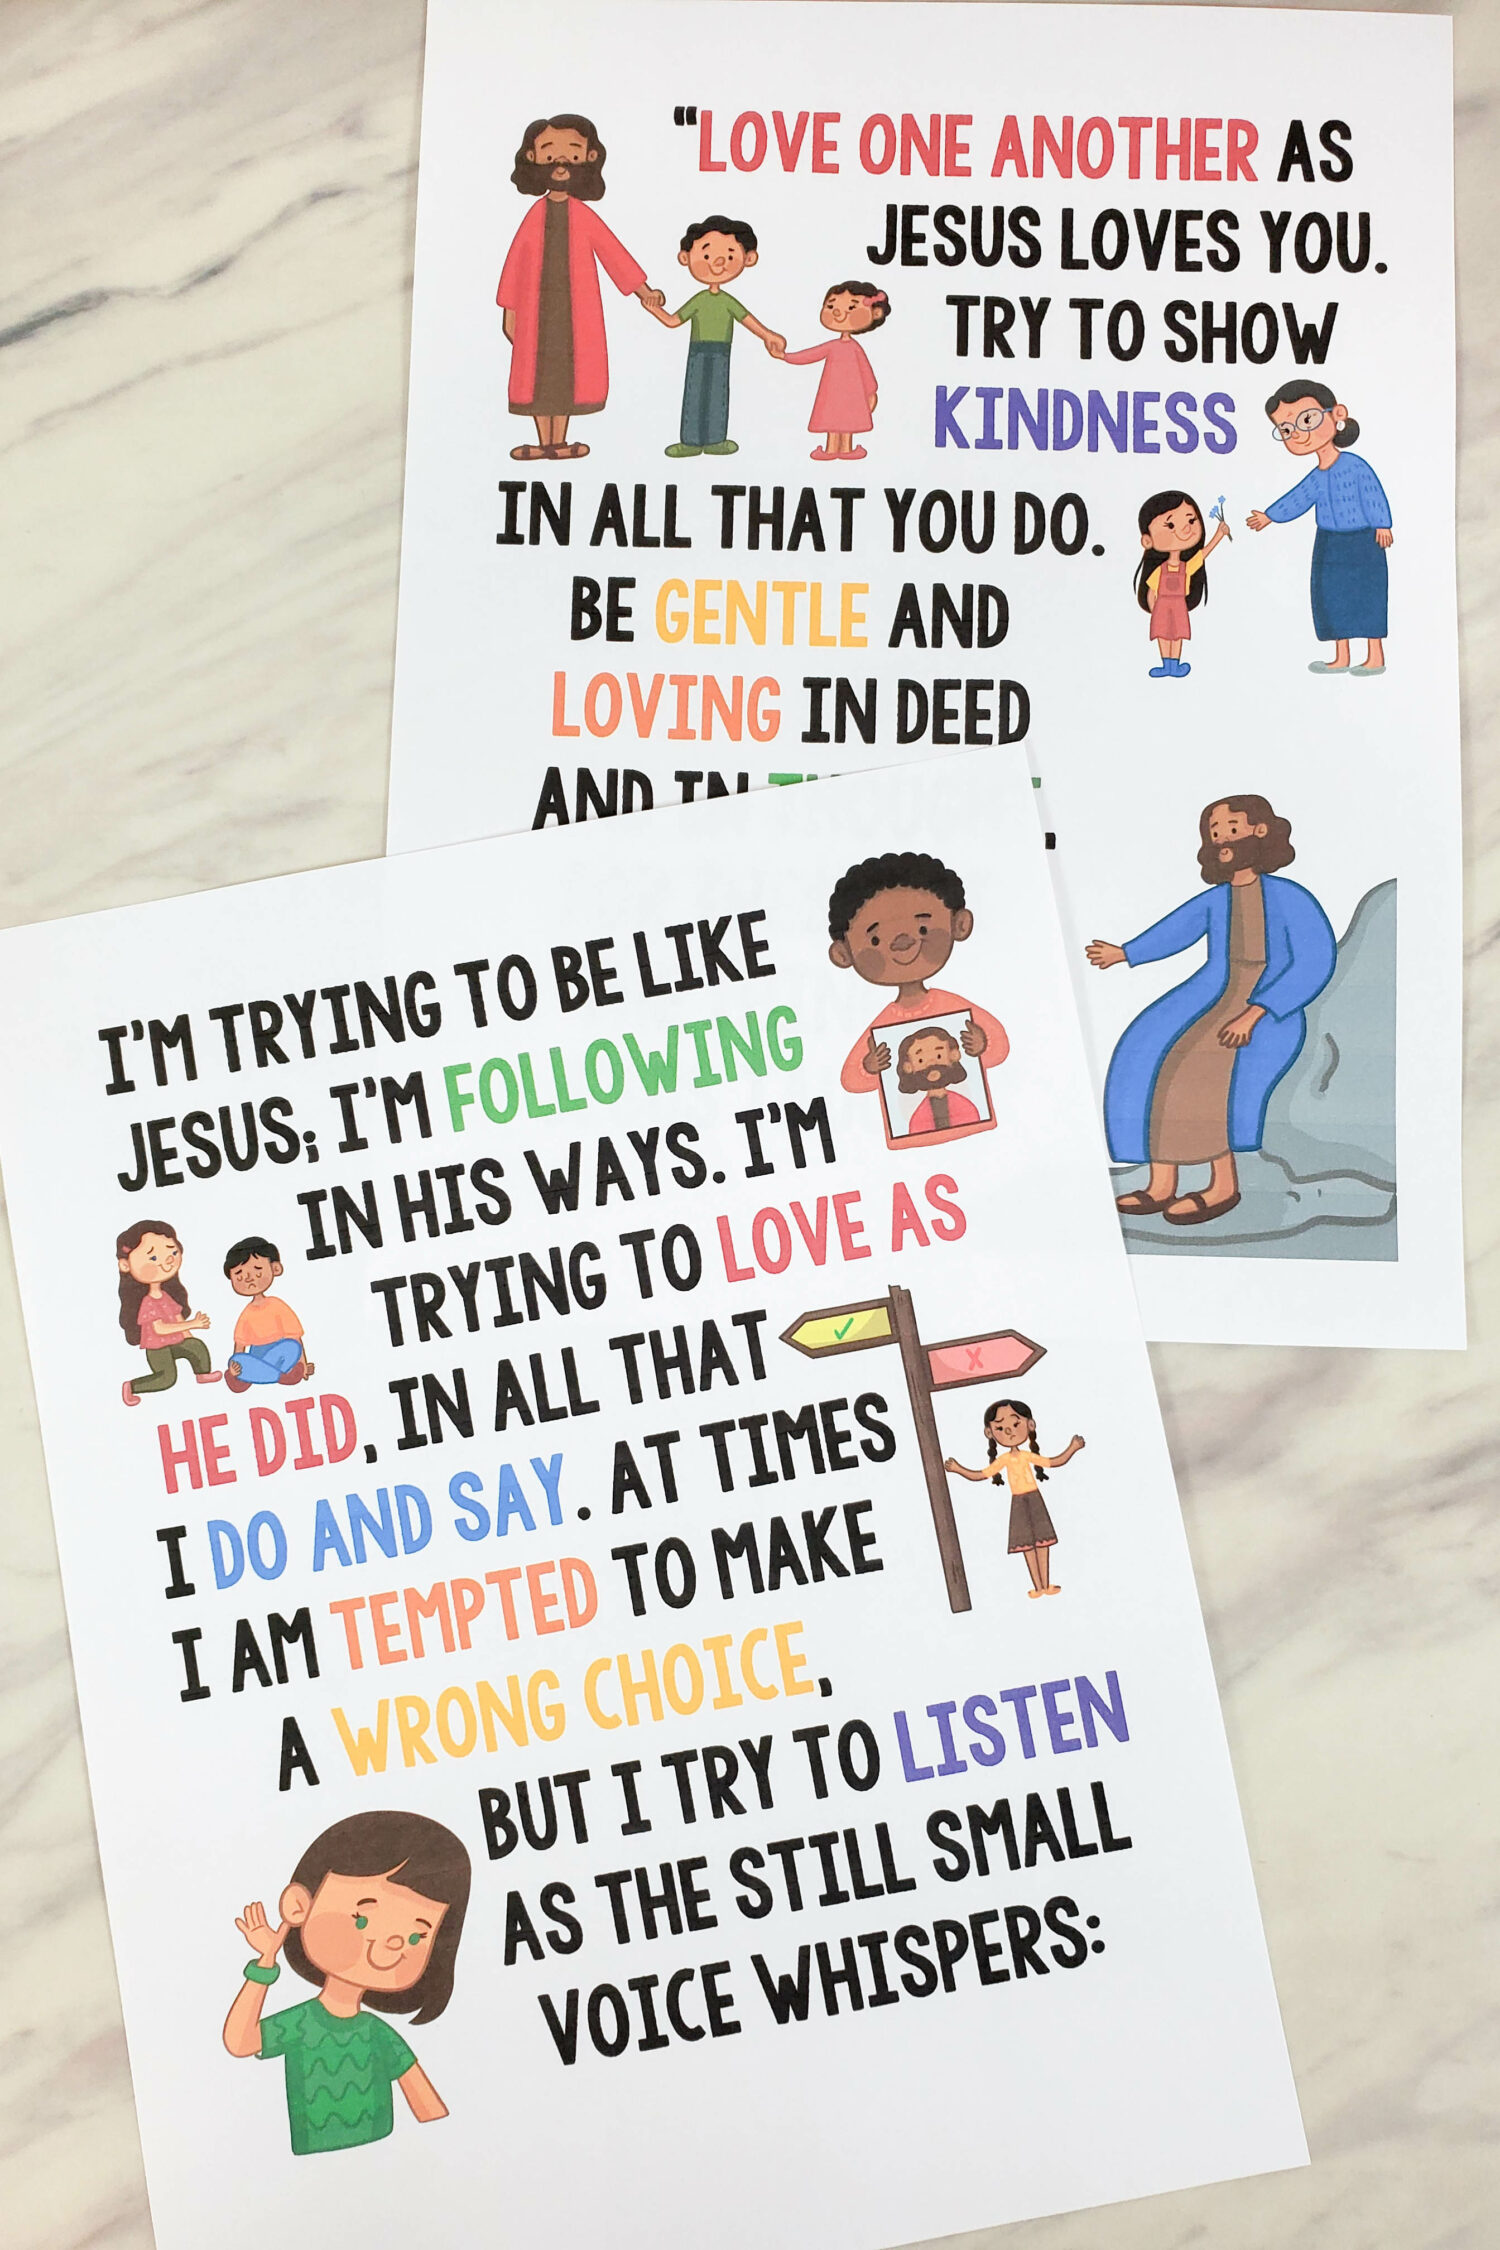 I'm Trying to Be Like Jesus Flip Chart for Primary Singing Time great visual aids to help teach this song for LDS Primary music leaders - illustration pictures and lyrics!